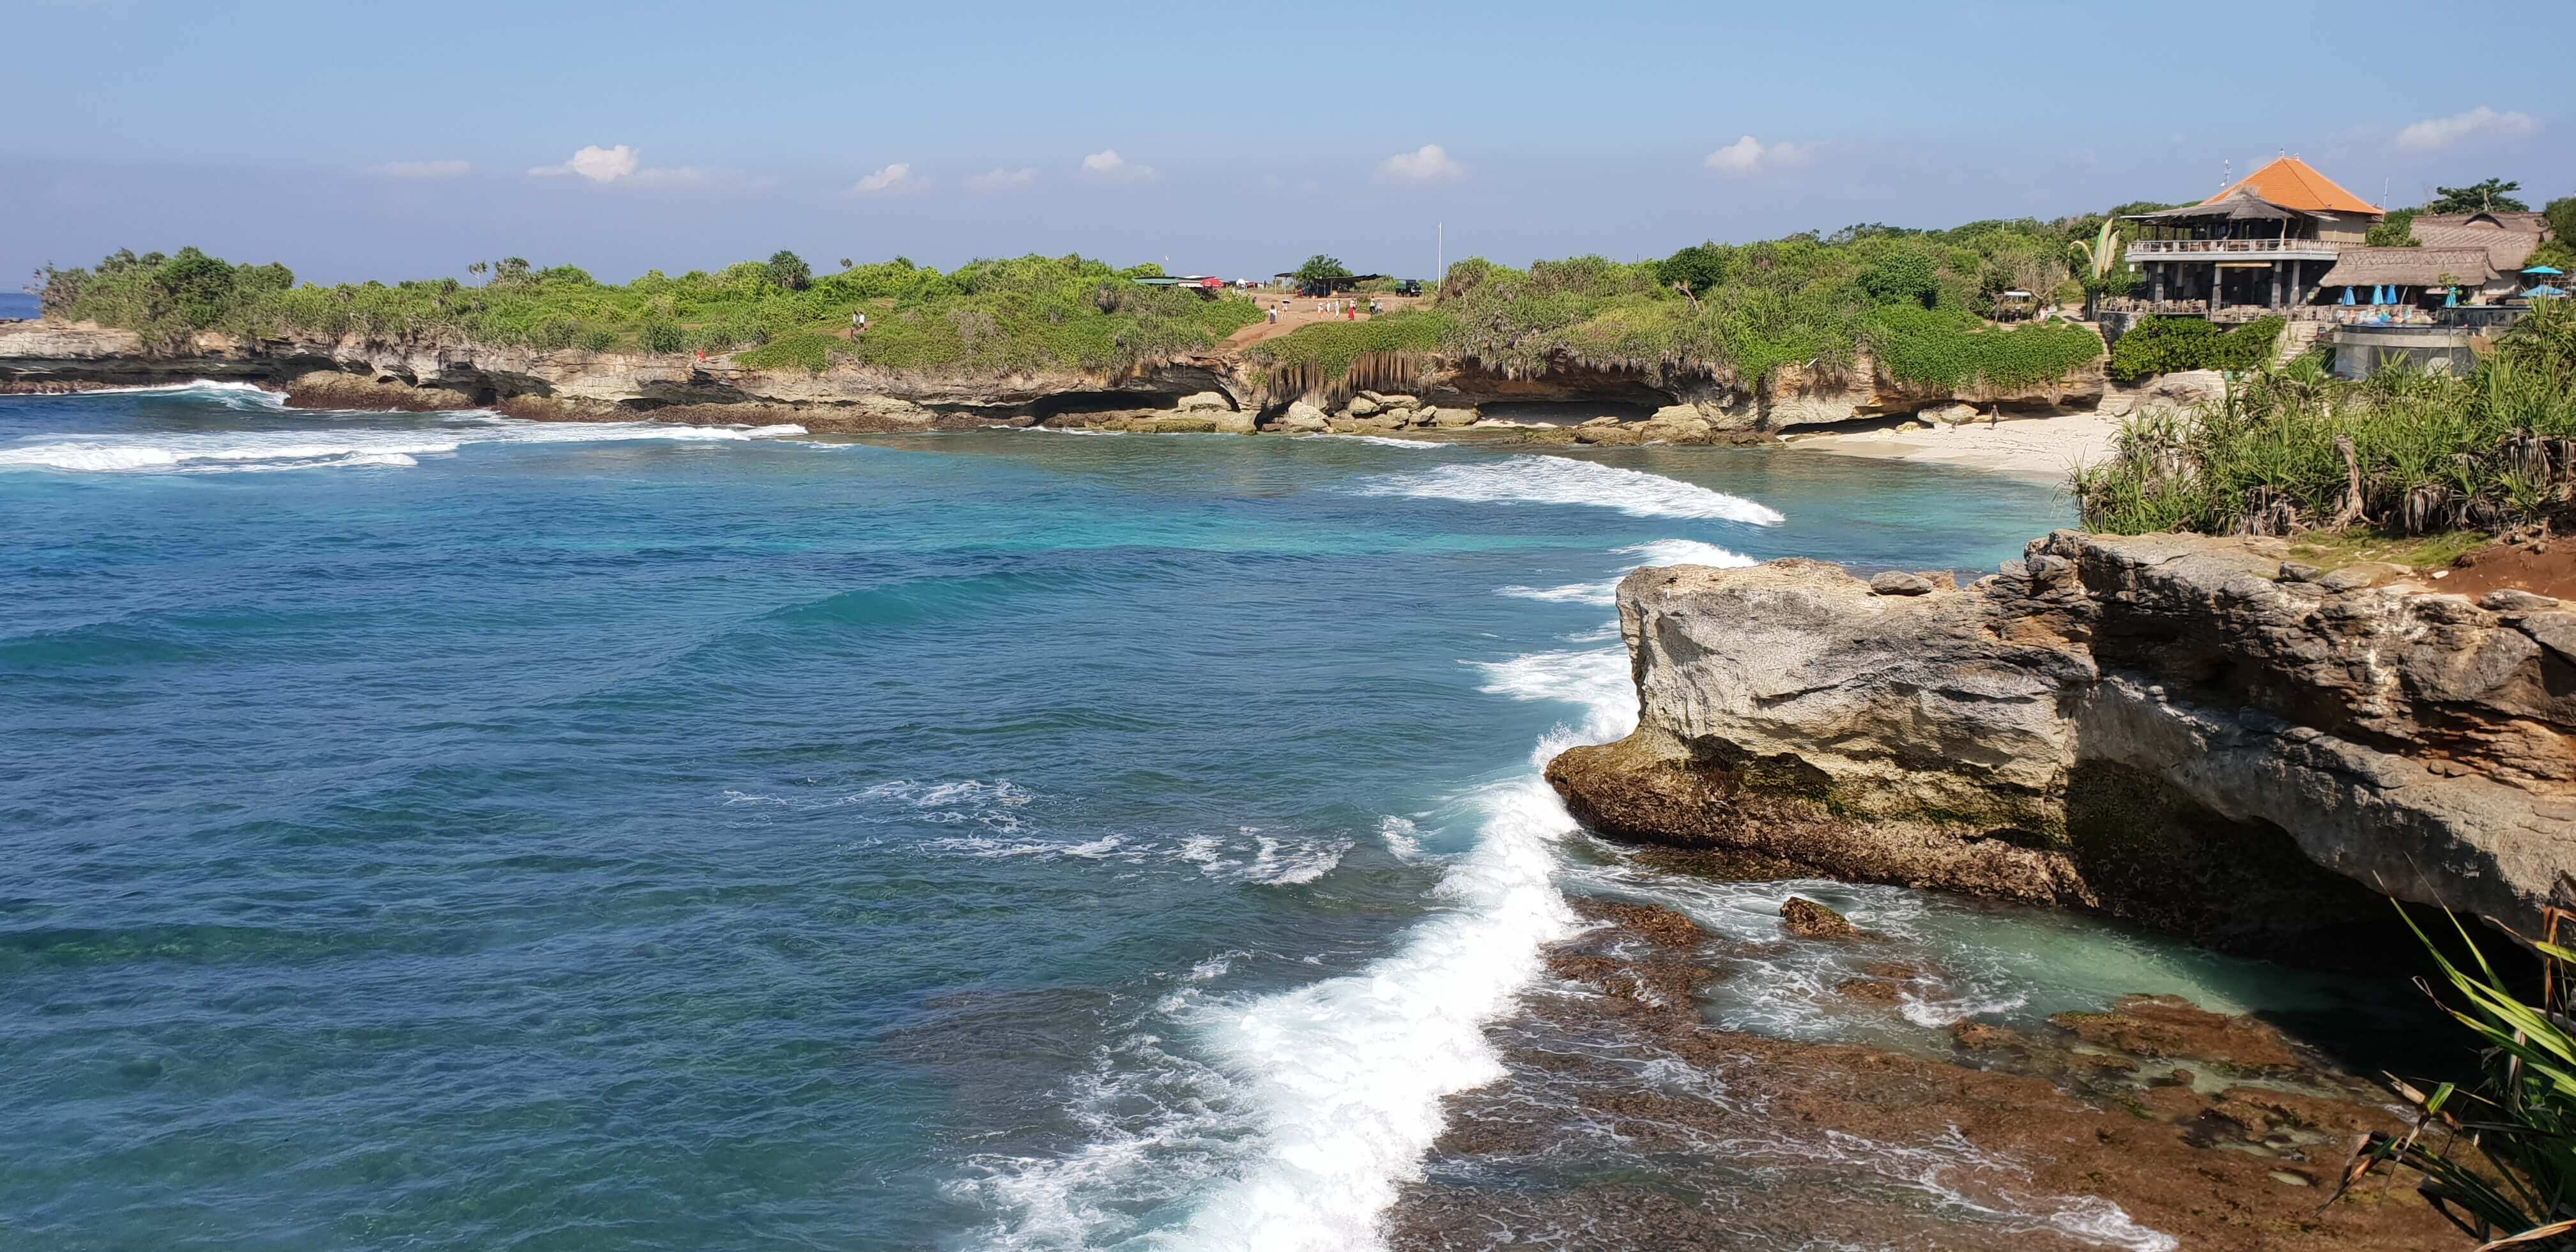 Nusa Lembongan is an idyllic island that you have to include in your 10 day Bali itinerary